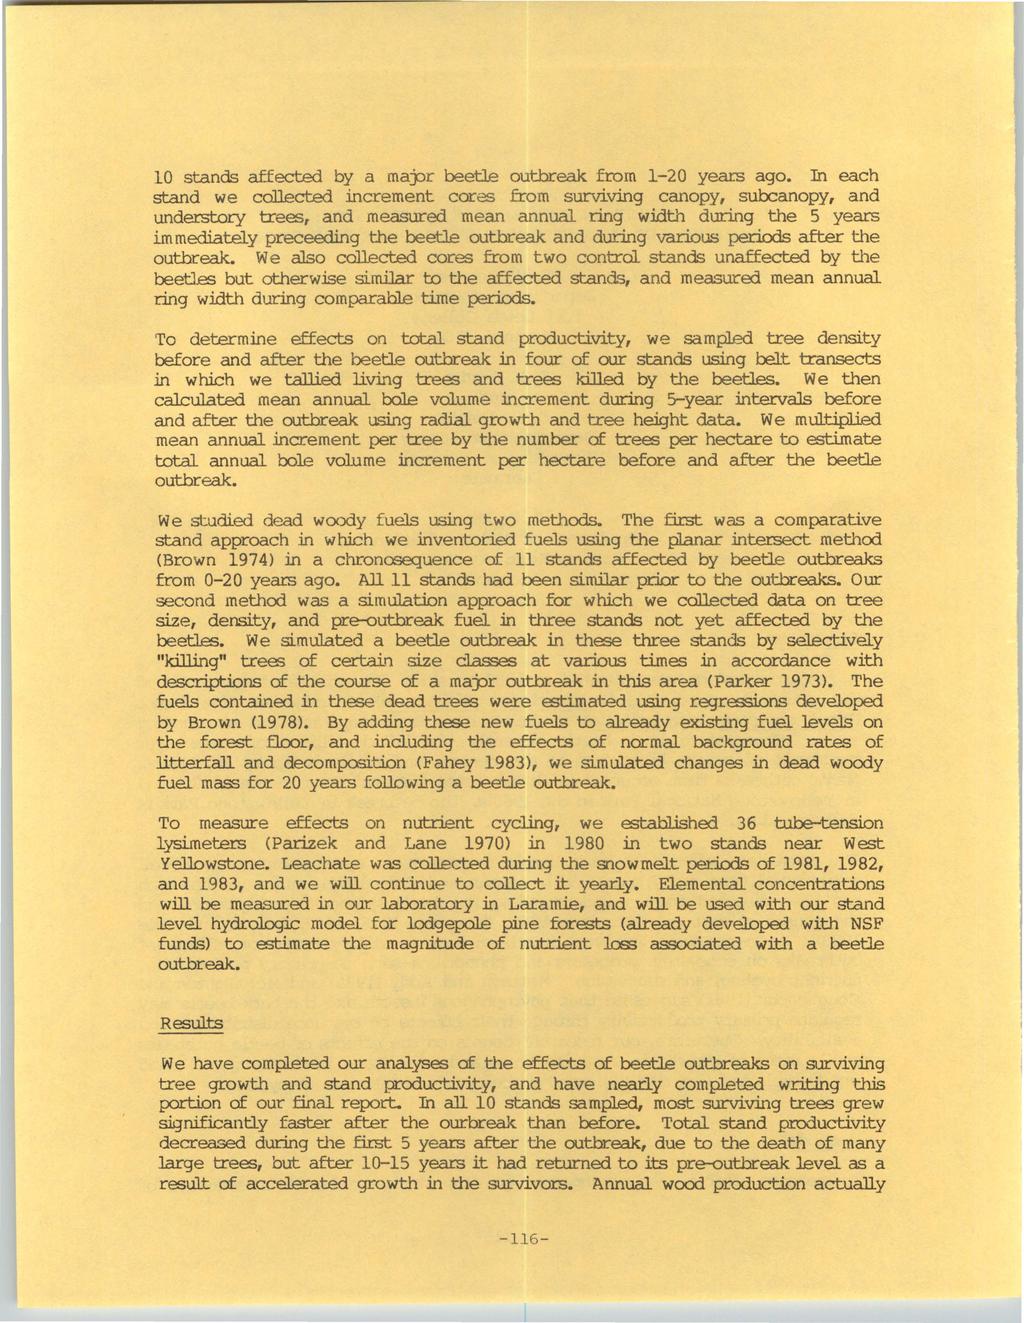 University of Wyoming National Park Service Research Center Annual Report, Vol. 7 [1983], Art. 23 10 stands affected by a maj::>r beetle outbreak from 1-20 years ago.